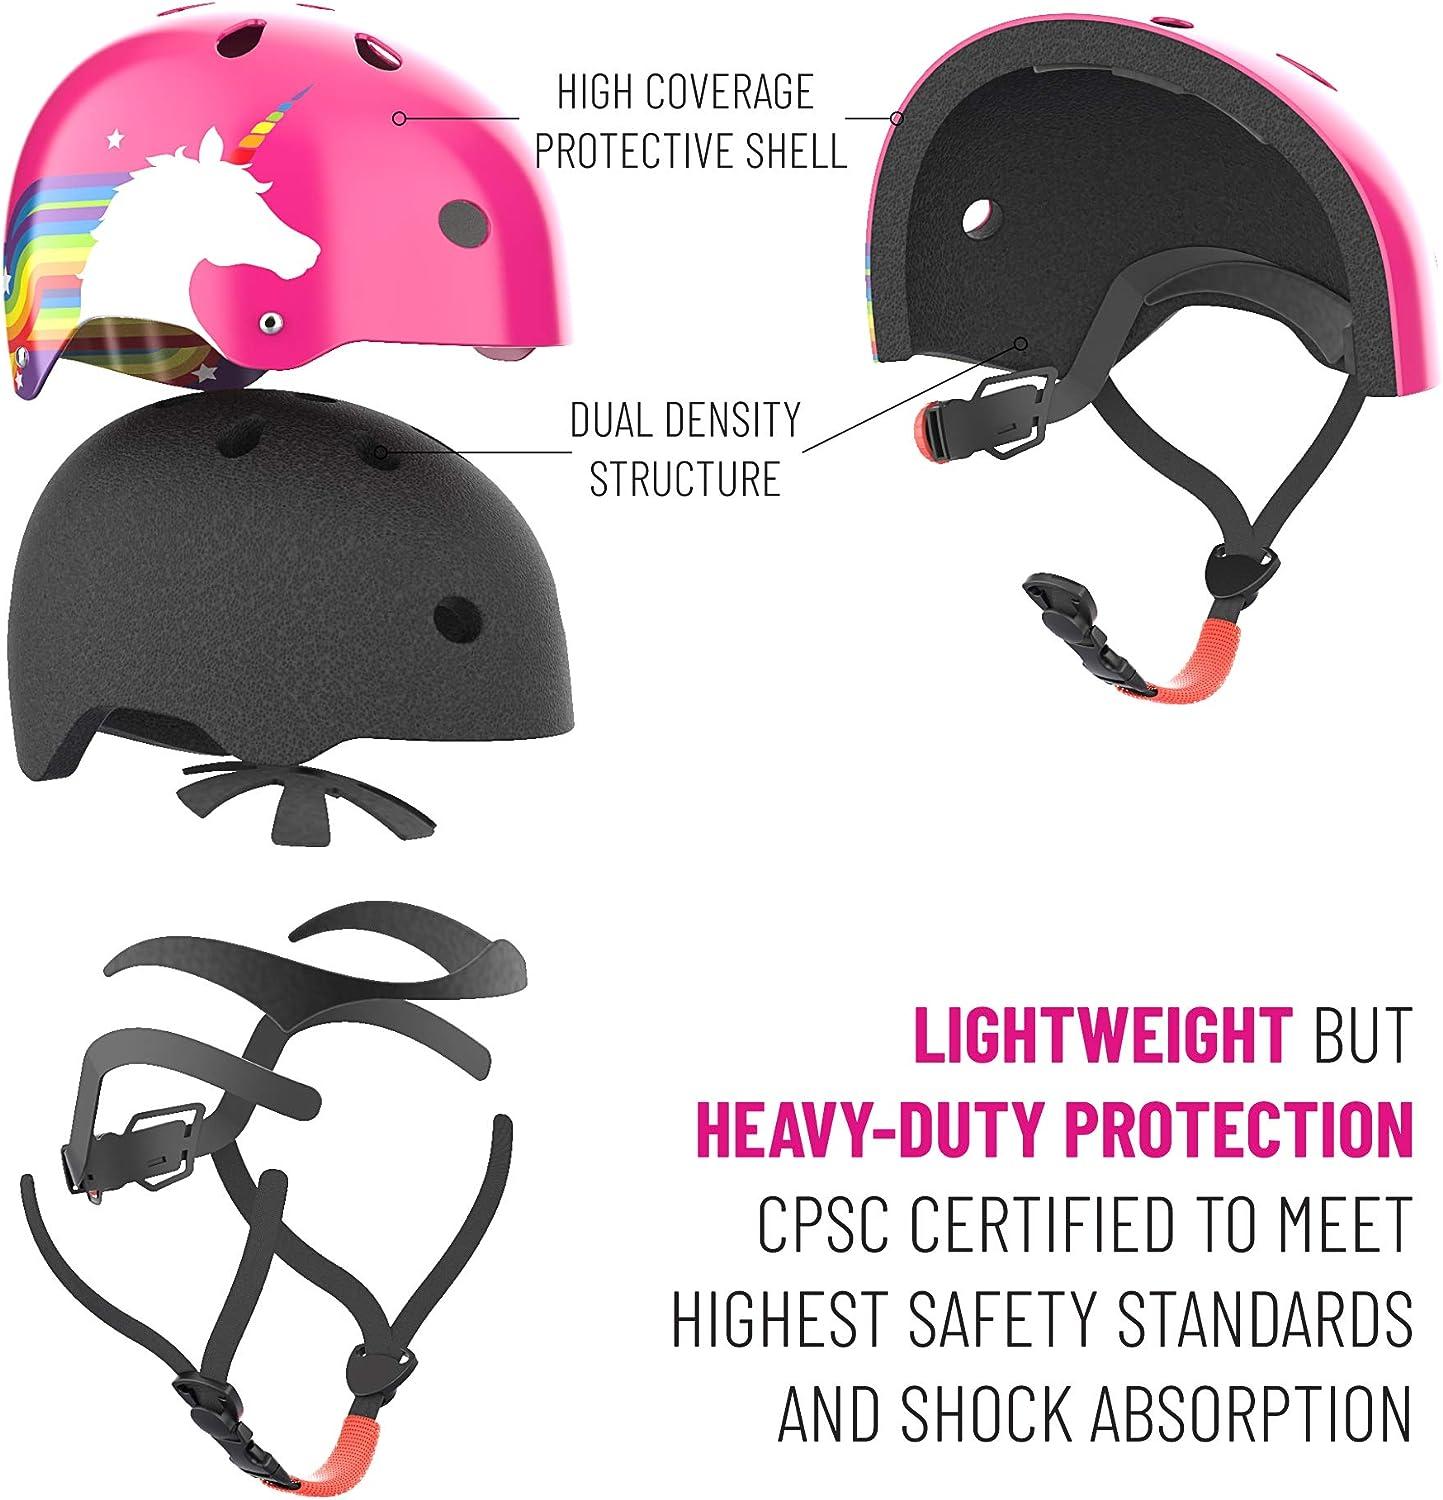 Noggn Bike Helmet for Kids, Girls and Boys 4 Designs Rainbow Unicorn, US Star, Tropical, Beach Child Bicycle, Scooter, Skateboard Helmet Small Pink